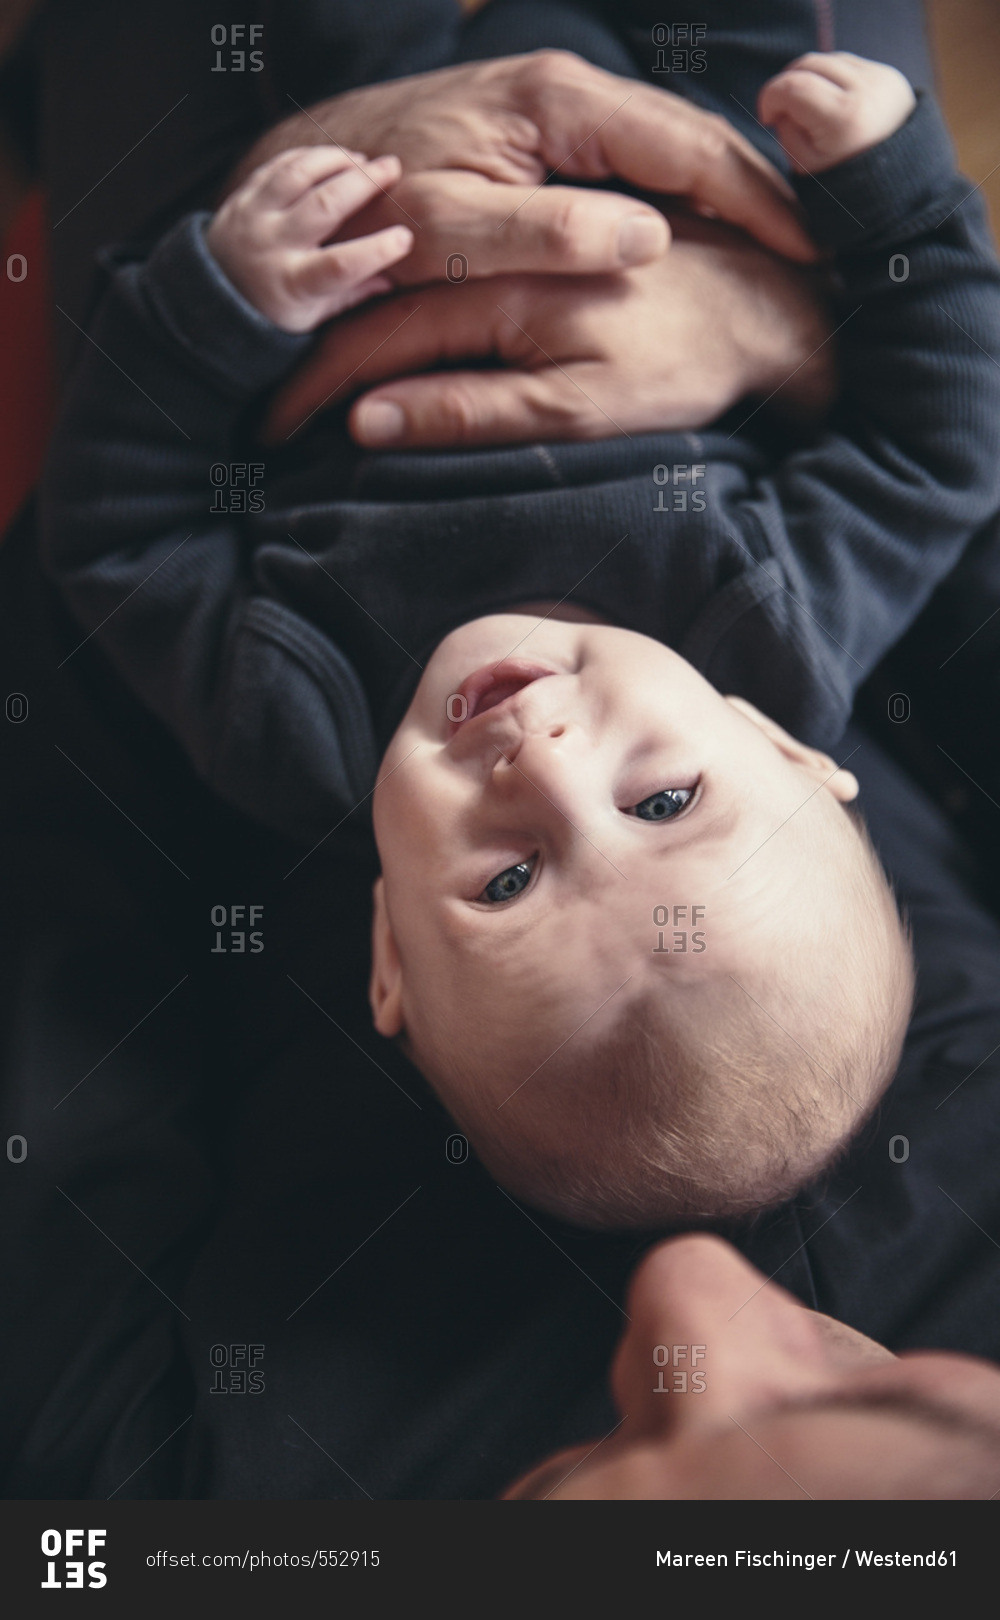 Three-month-old baby being held by father as seen from above